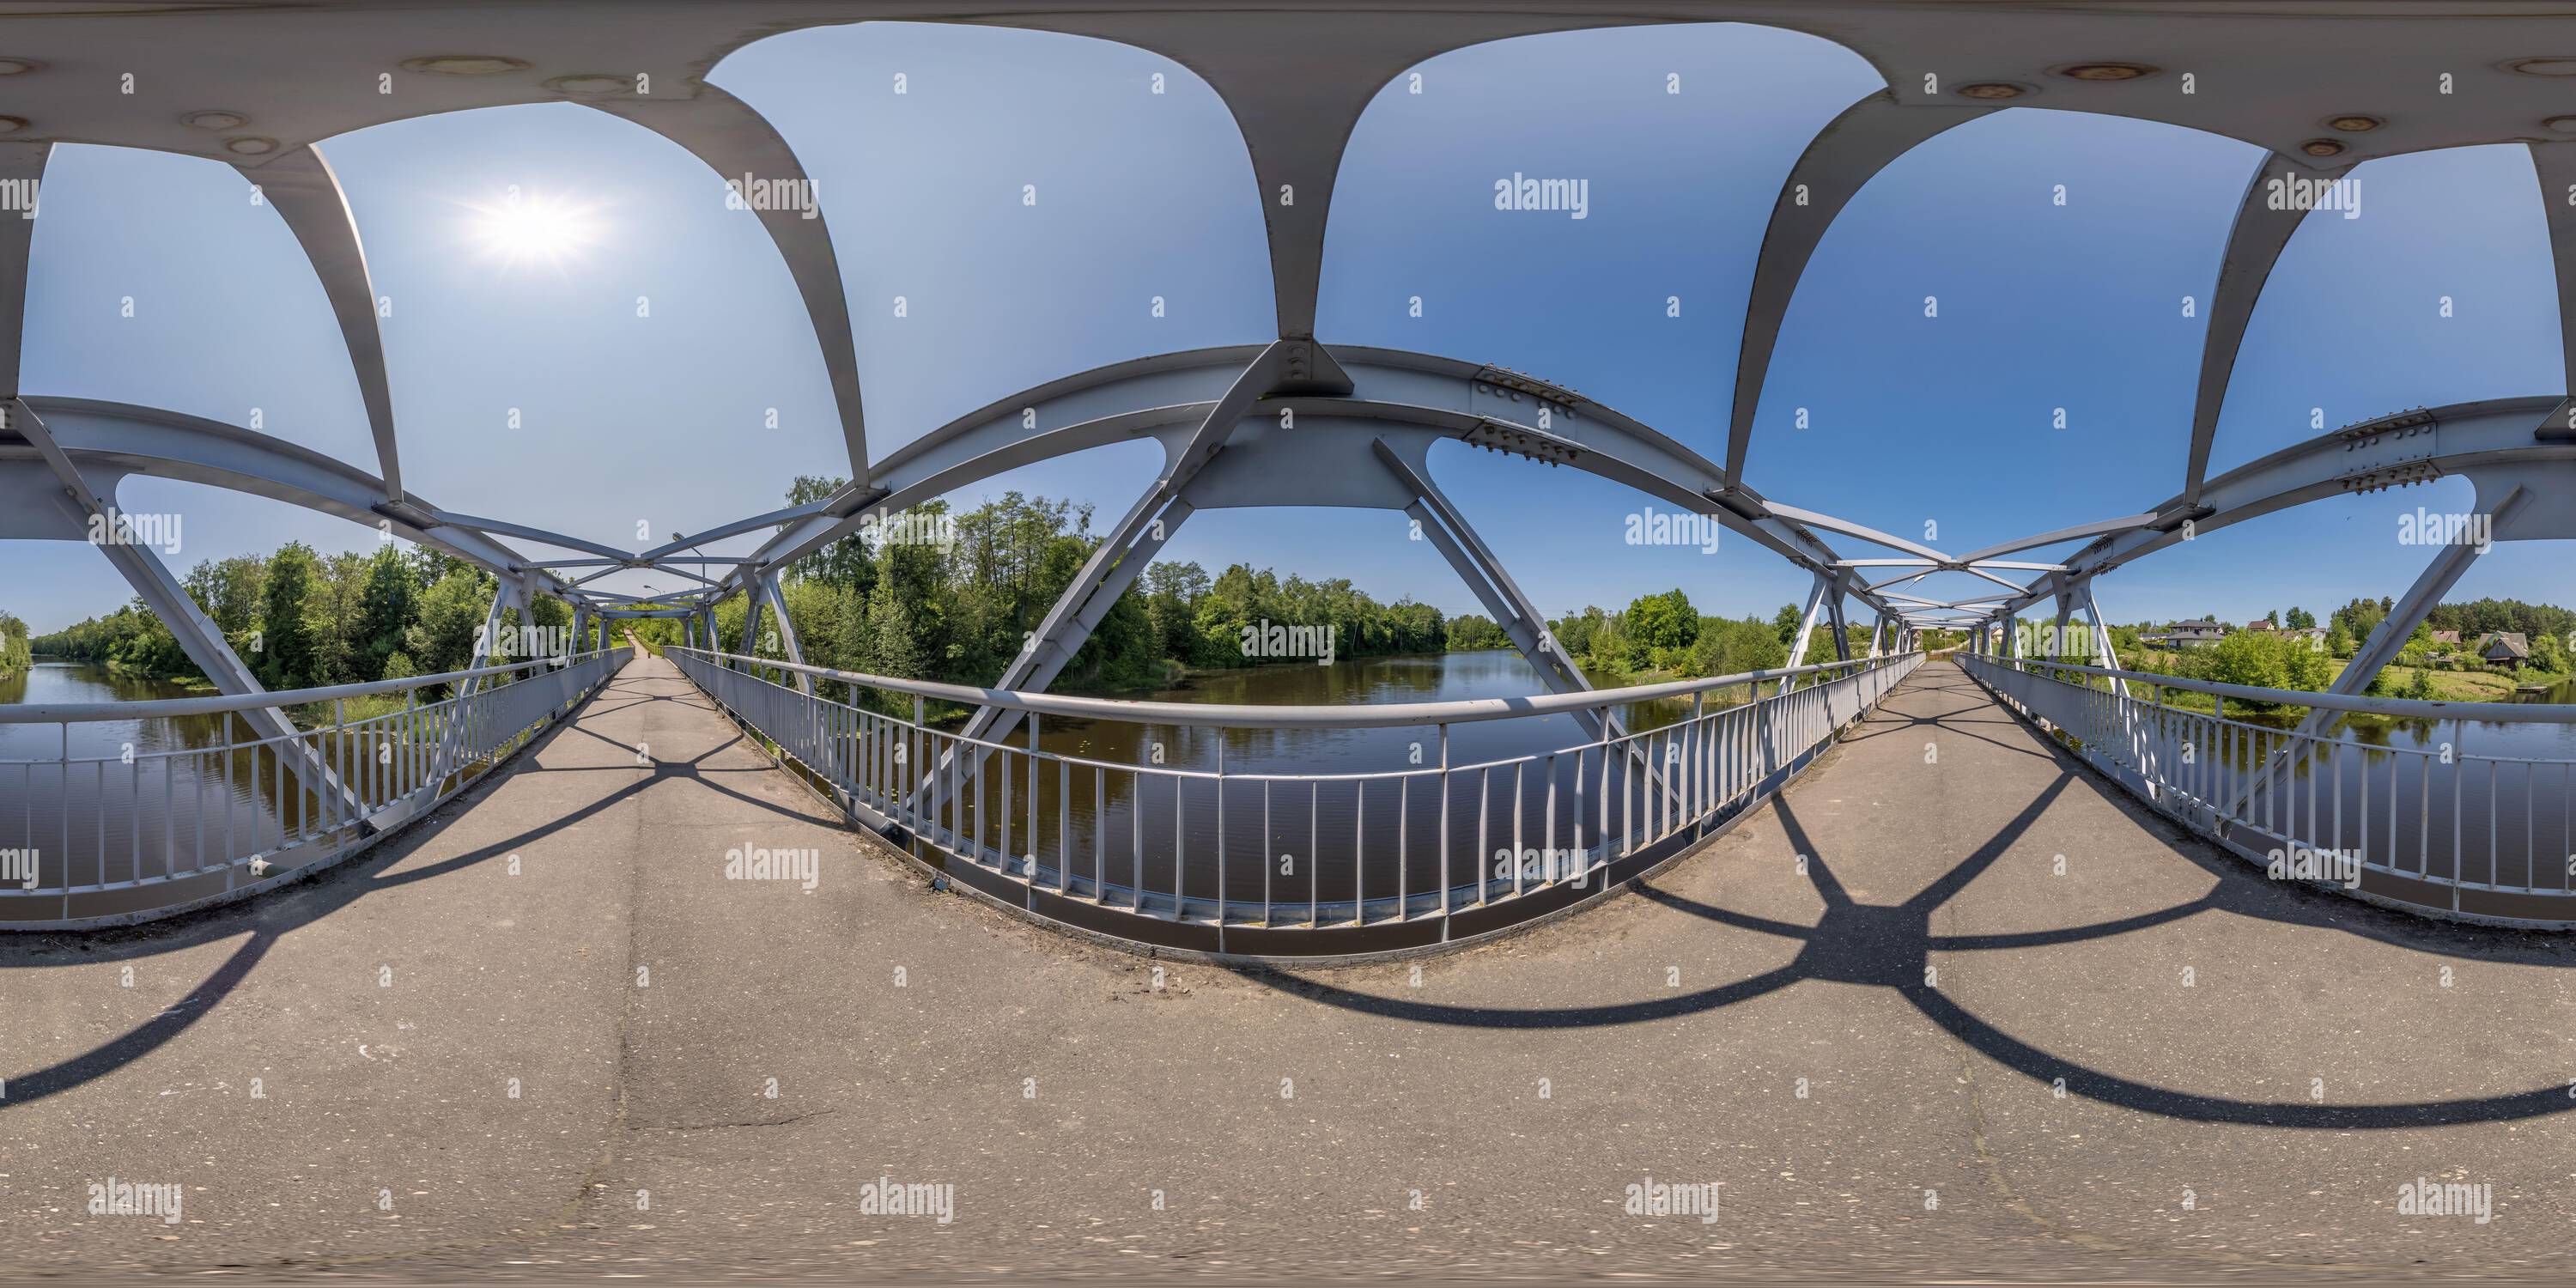 360 degree panoramic view of full seamless spherical 360 hdri panorama on iron steel frame construction of pedestrian bridge across the river in equirectangular projection, ready